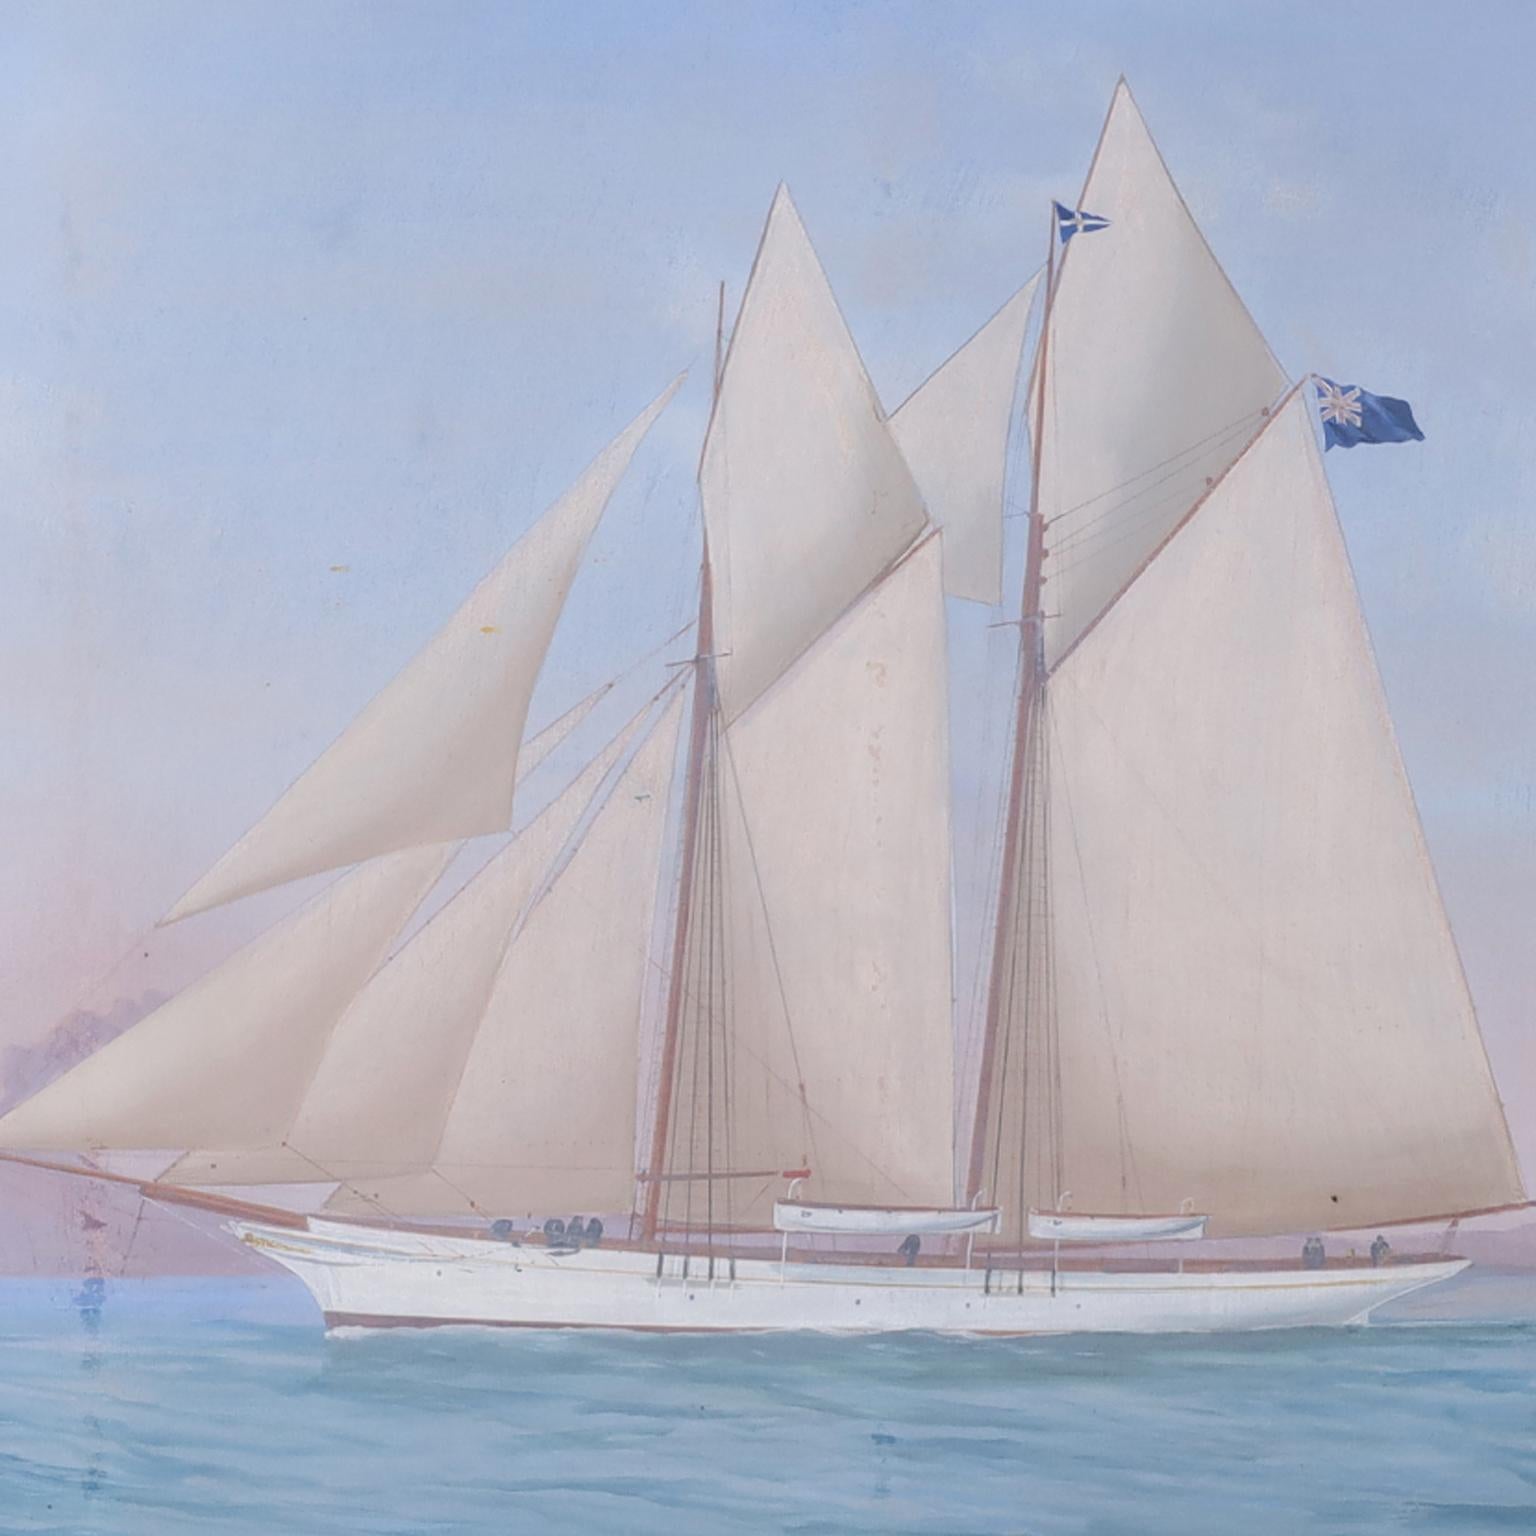 19th century painting of a yacht flying the English flag and named Aphrodite, executed with gouache and painted on the Mediterranean sea by noted Italian marine artist Antonio De Simone in 1888. Presented in a mahogany frame under non-reflective